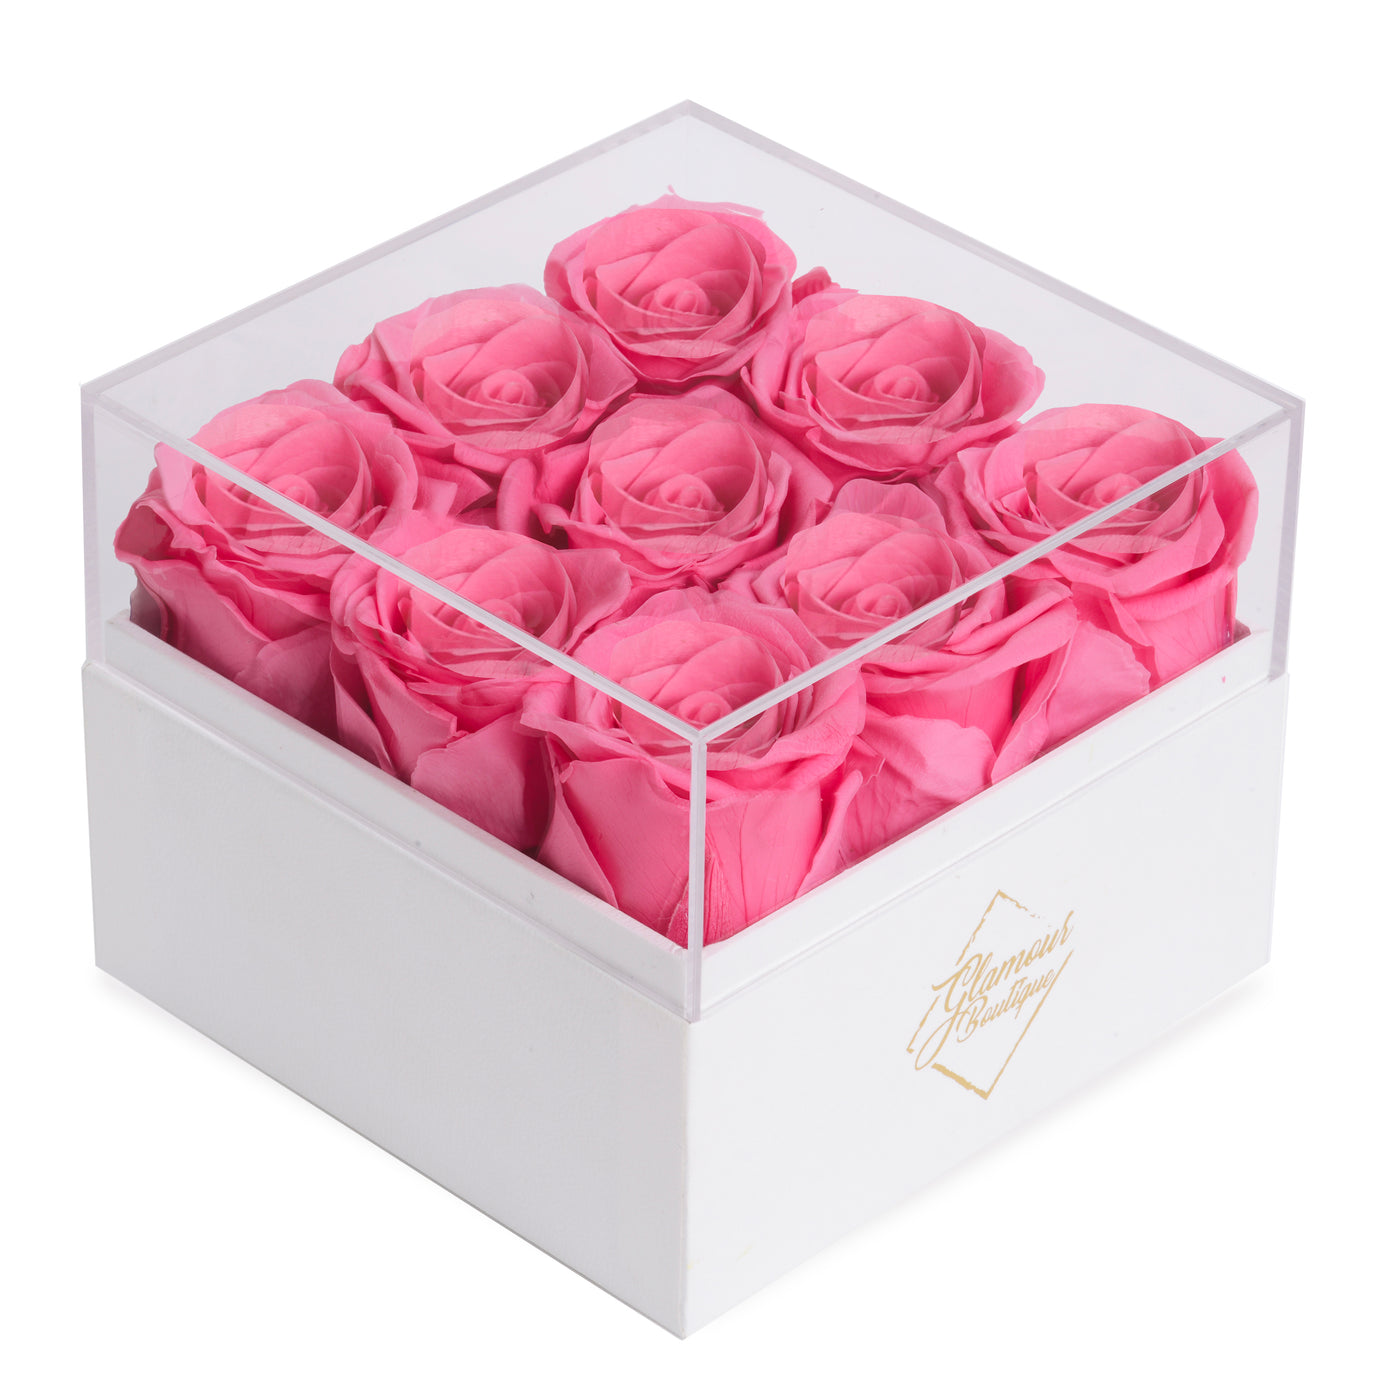 9 Preserved Roses Cased in White Box with Acrylic Cover - Pink